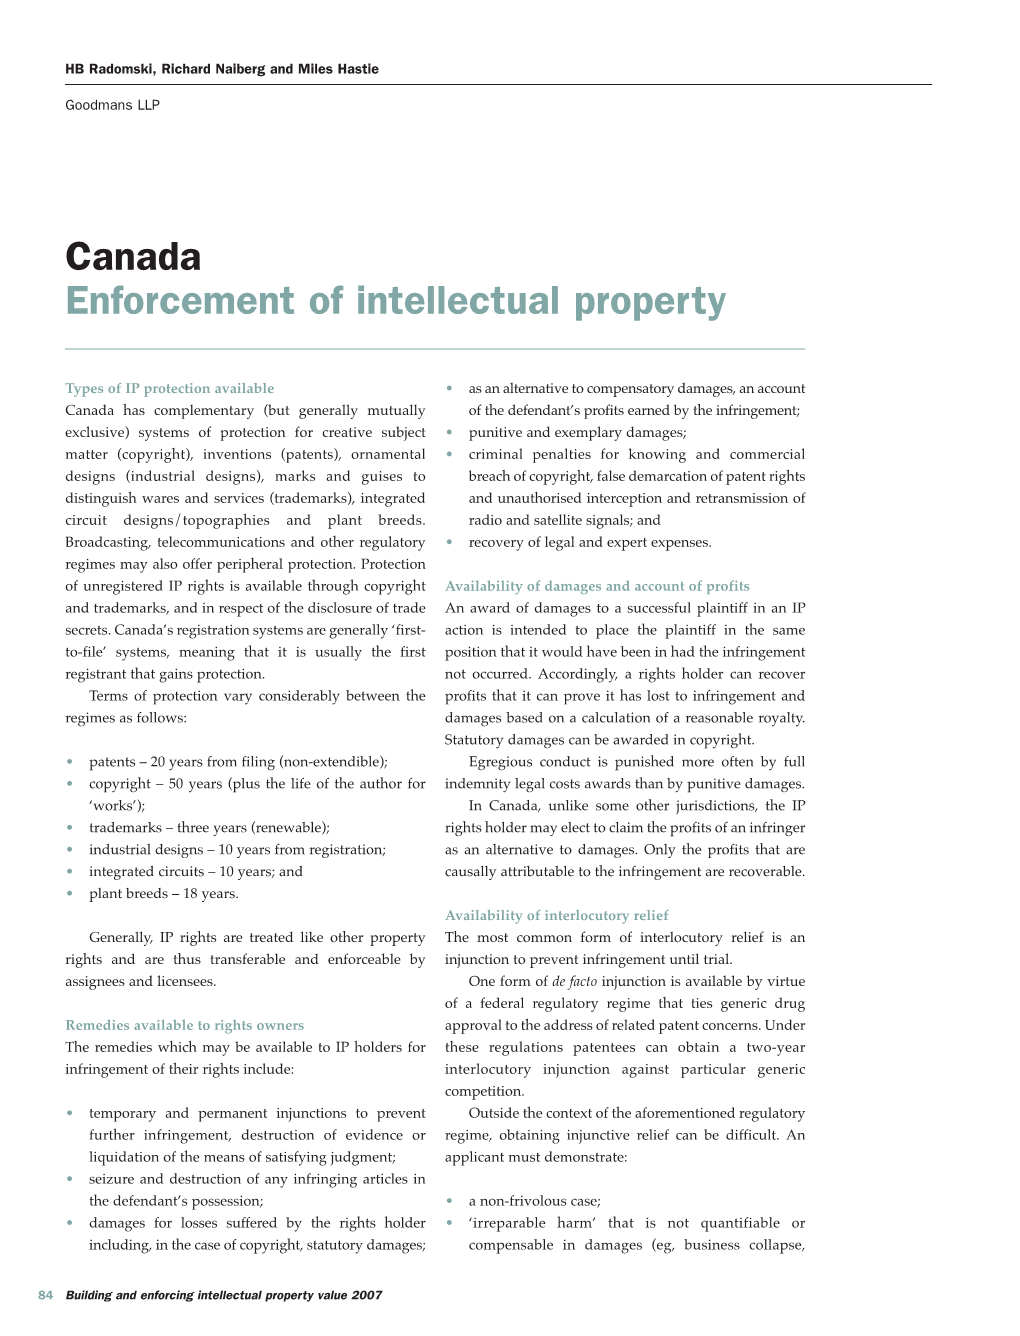 Canada Enforcement of Intellectual Property